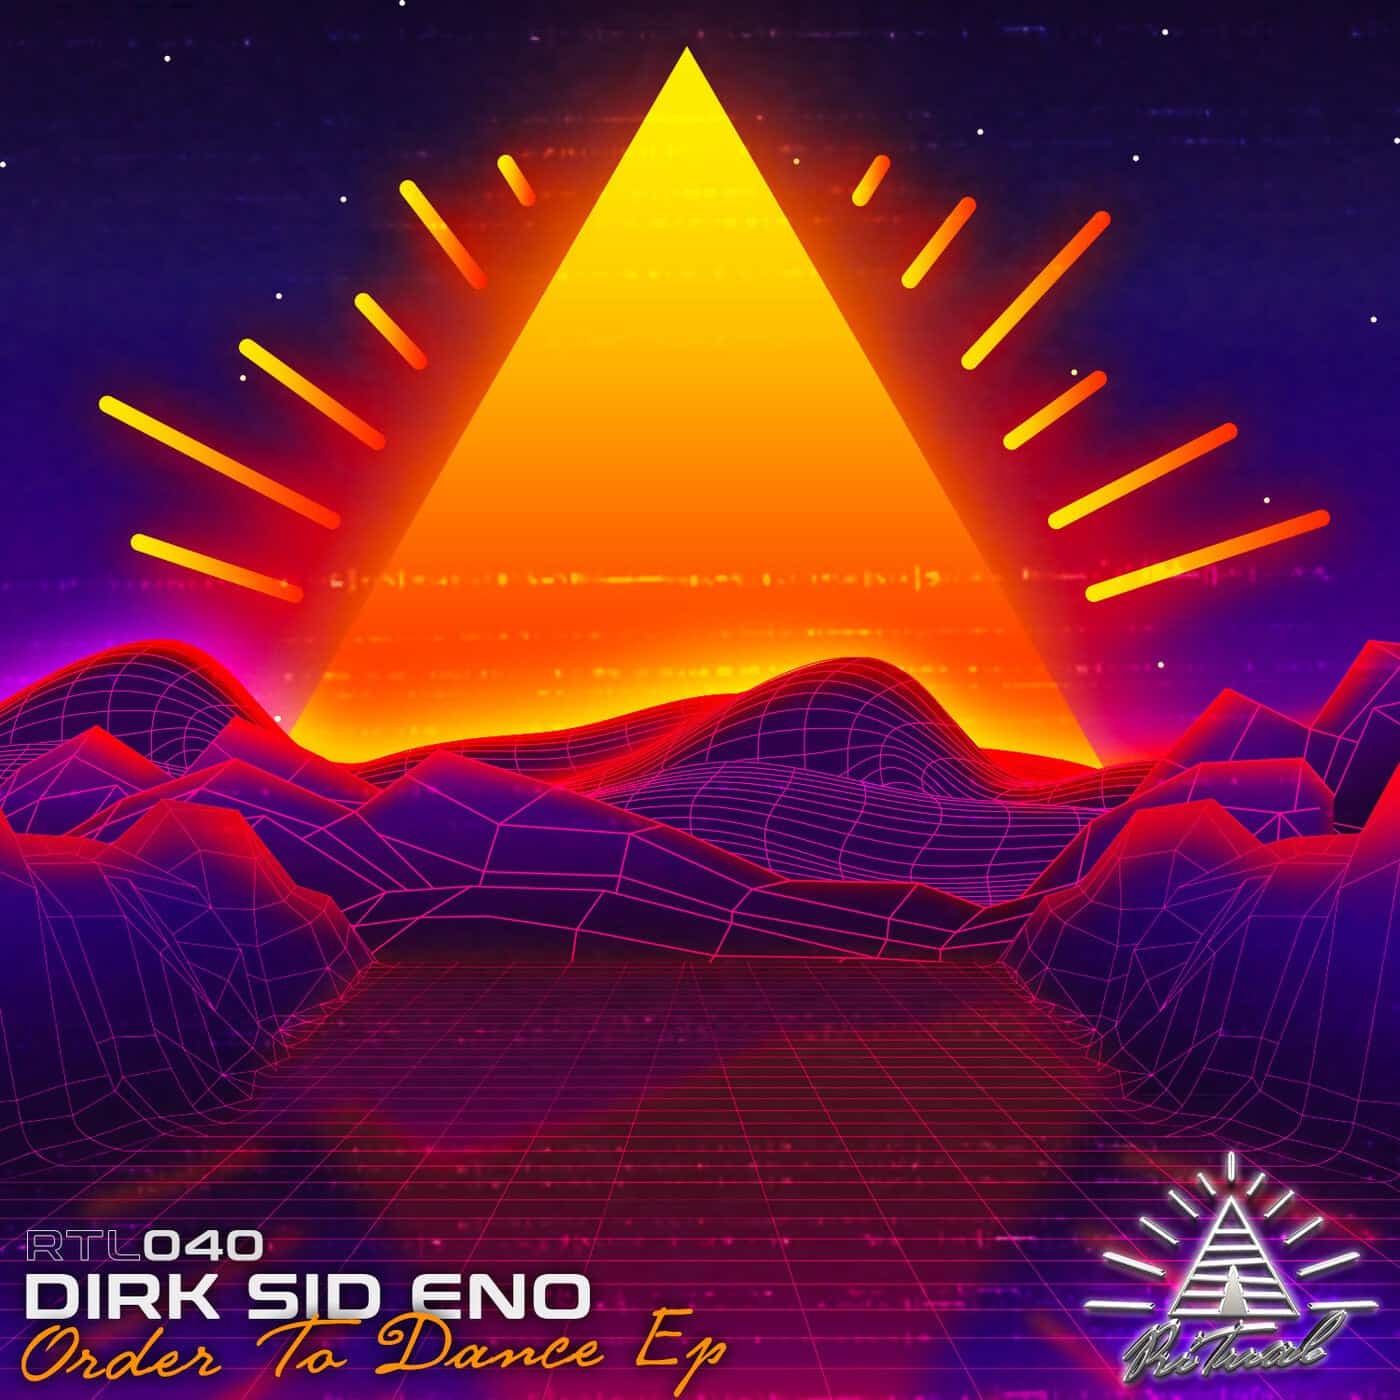 Download Dirk Sid Eno - Order To Dance EP